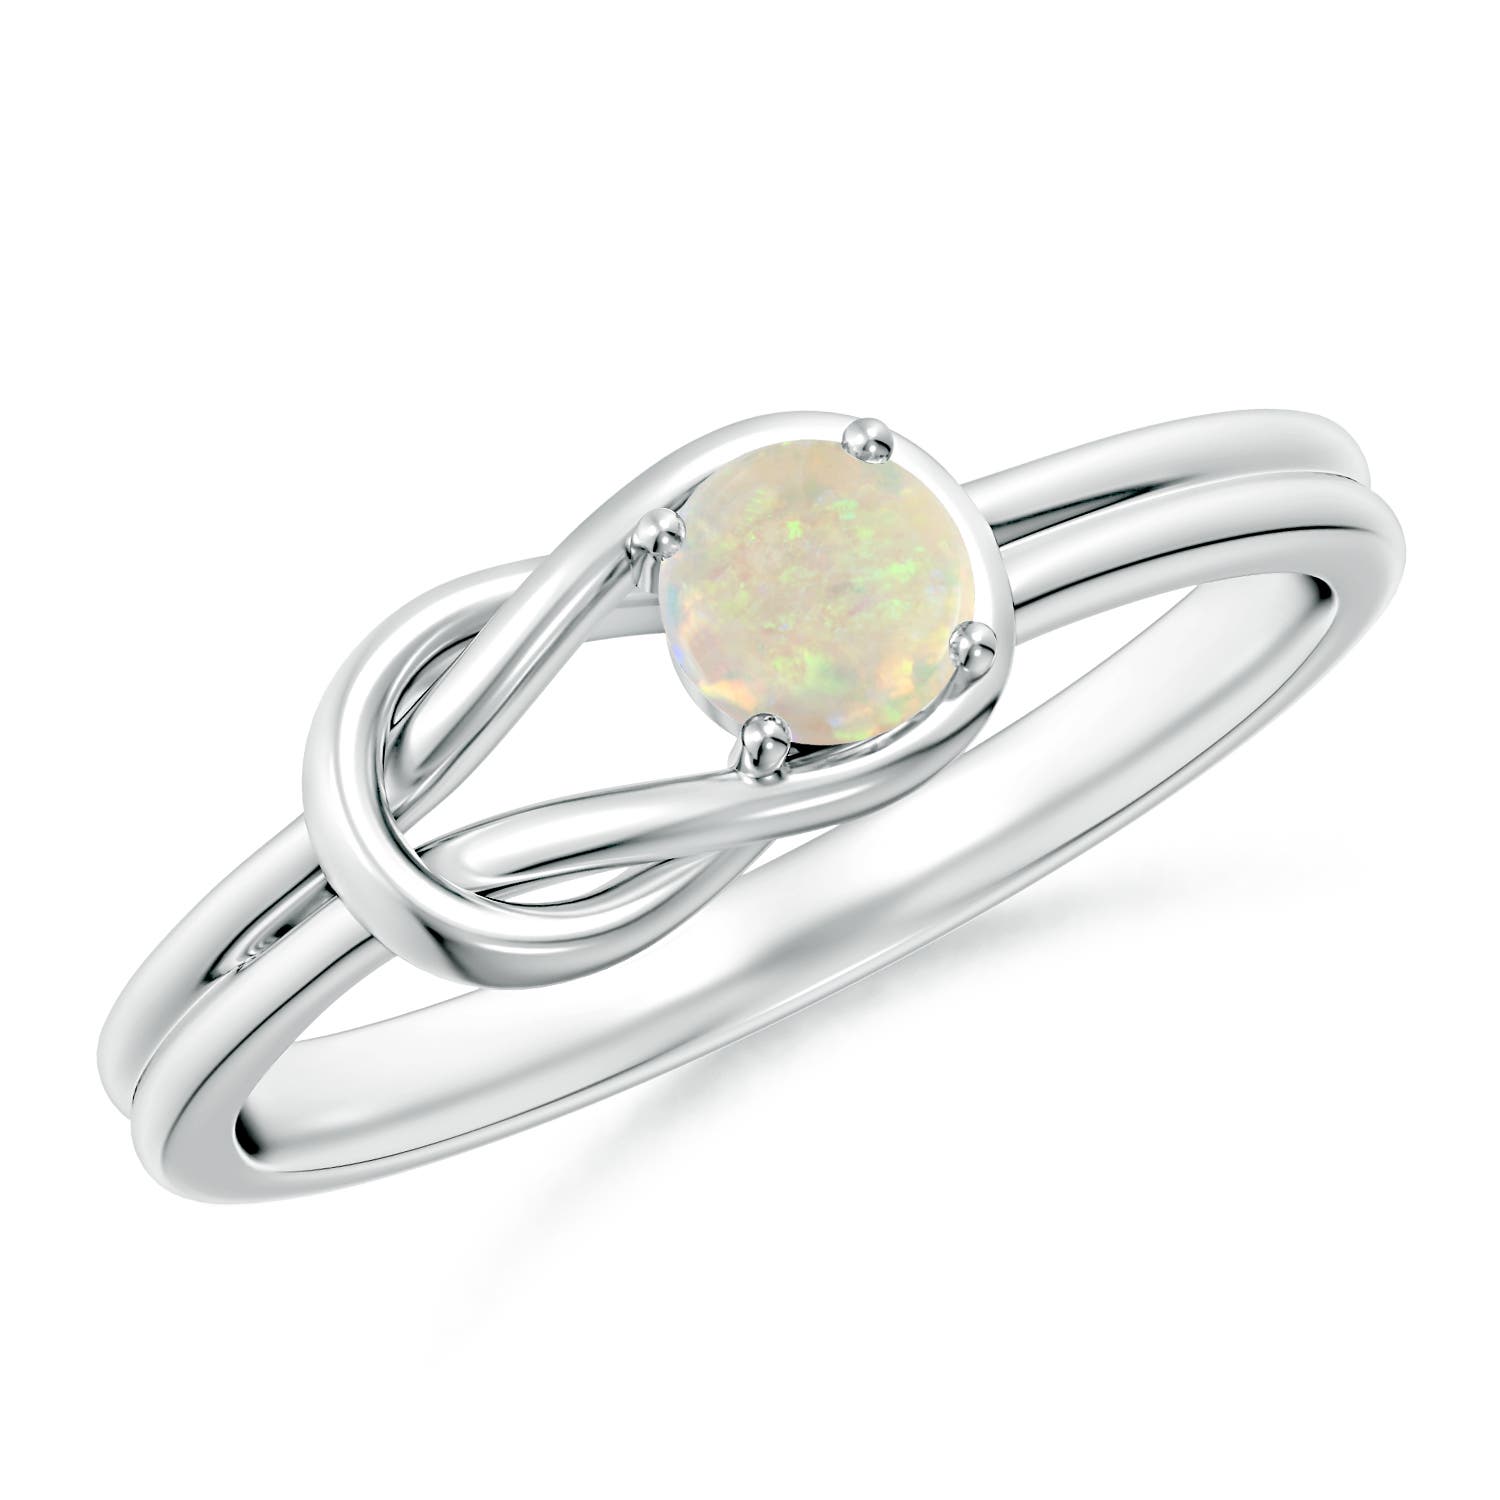 AAA - Opal / 0.16 CT / 14 KT White Gold